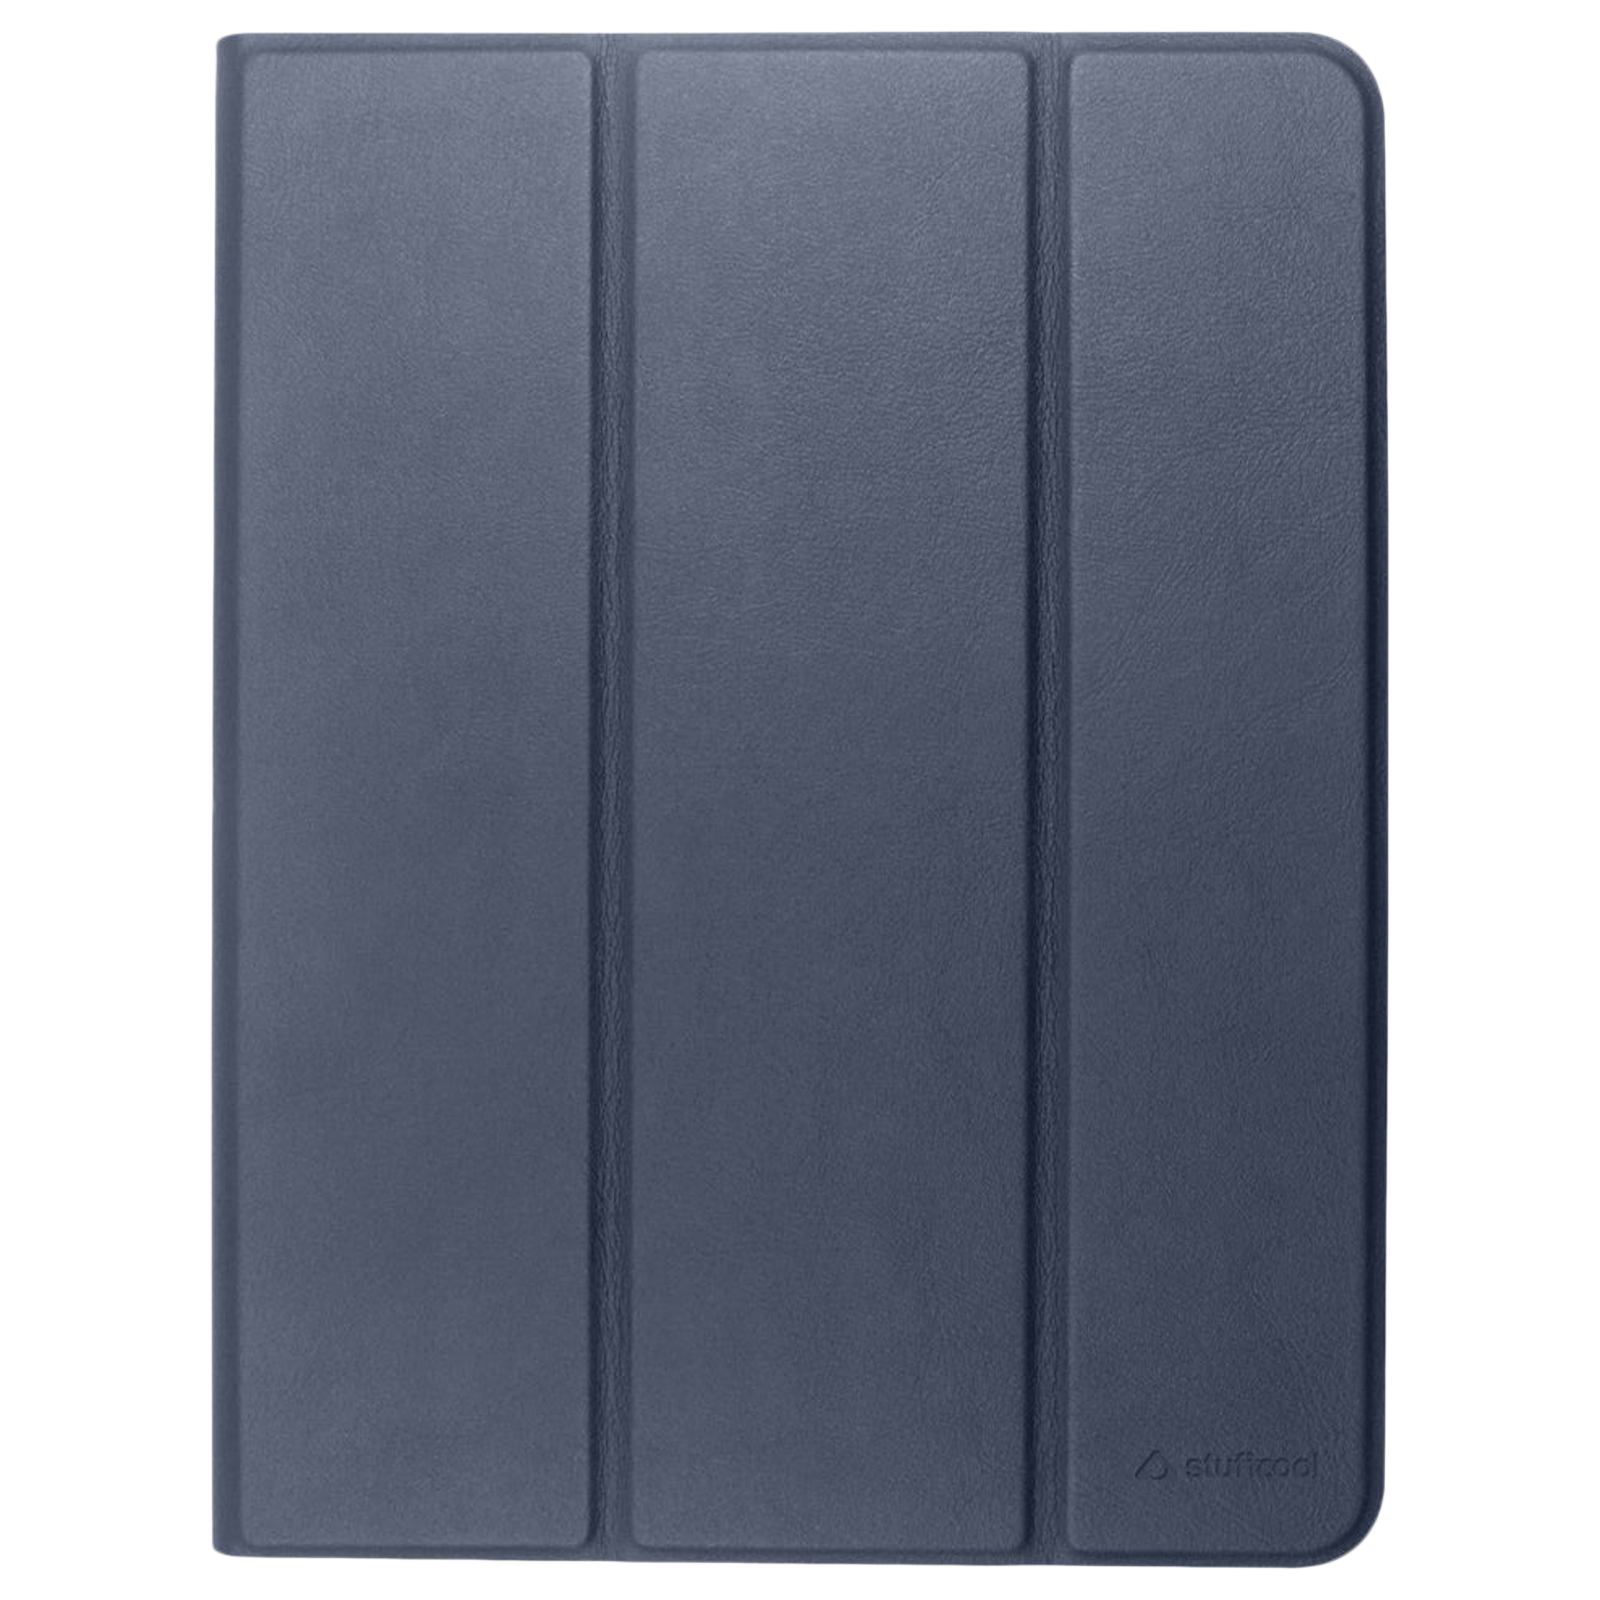 Stuffcool Flex Faux Leather Flip Cover for Apple iPad 10.2 Inch (9th Gen) (Built-in Pencil Holder, Navy)